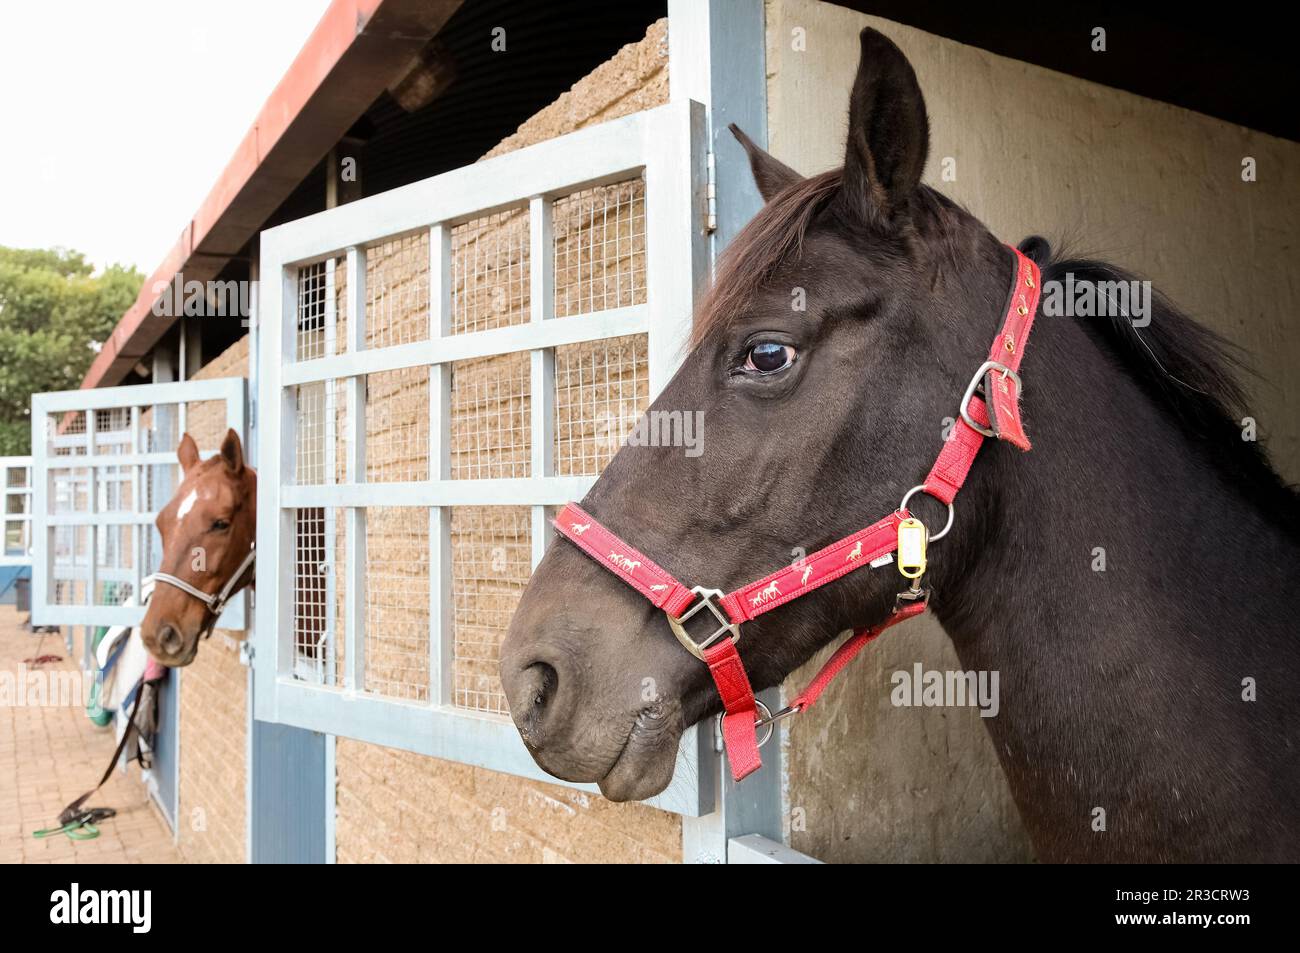 Horses heads poking out of stable doors Stock Photo